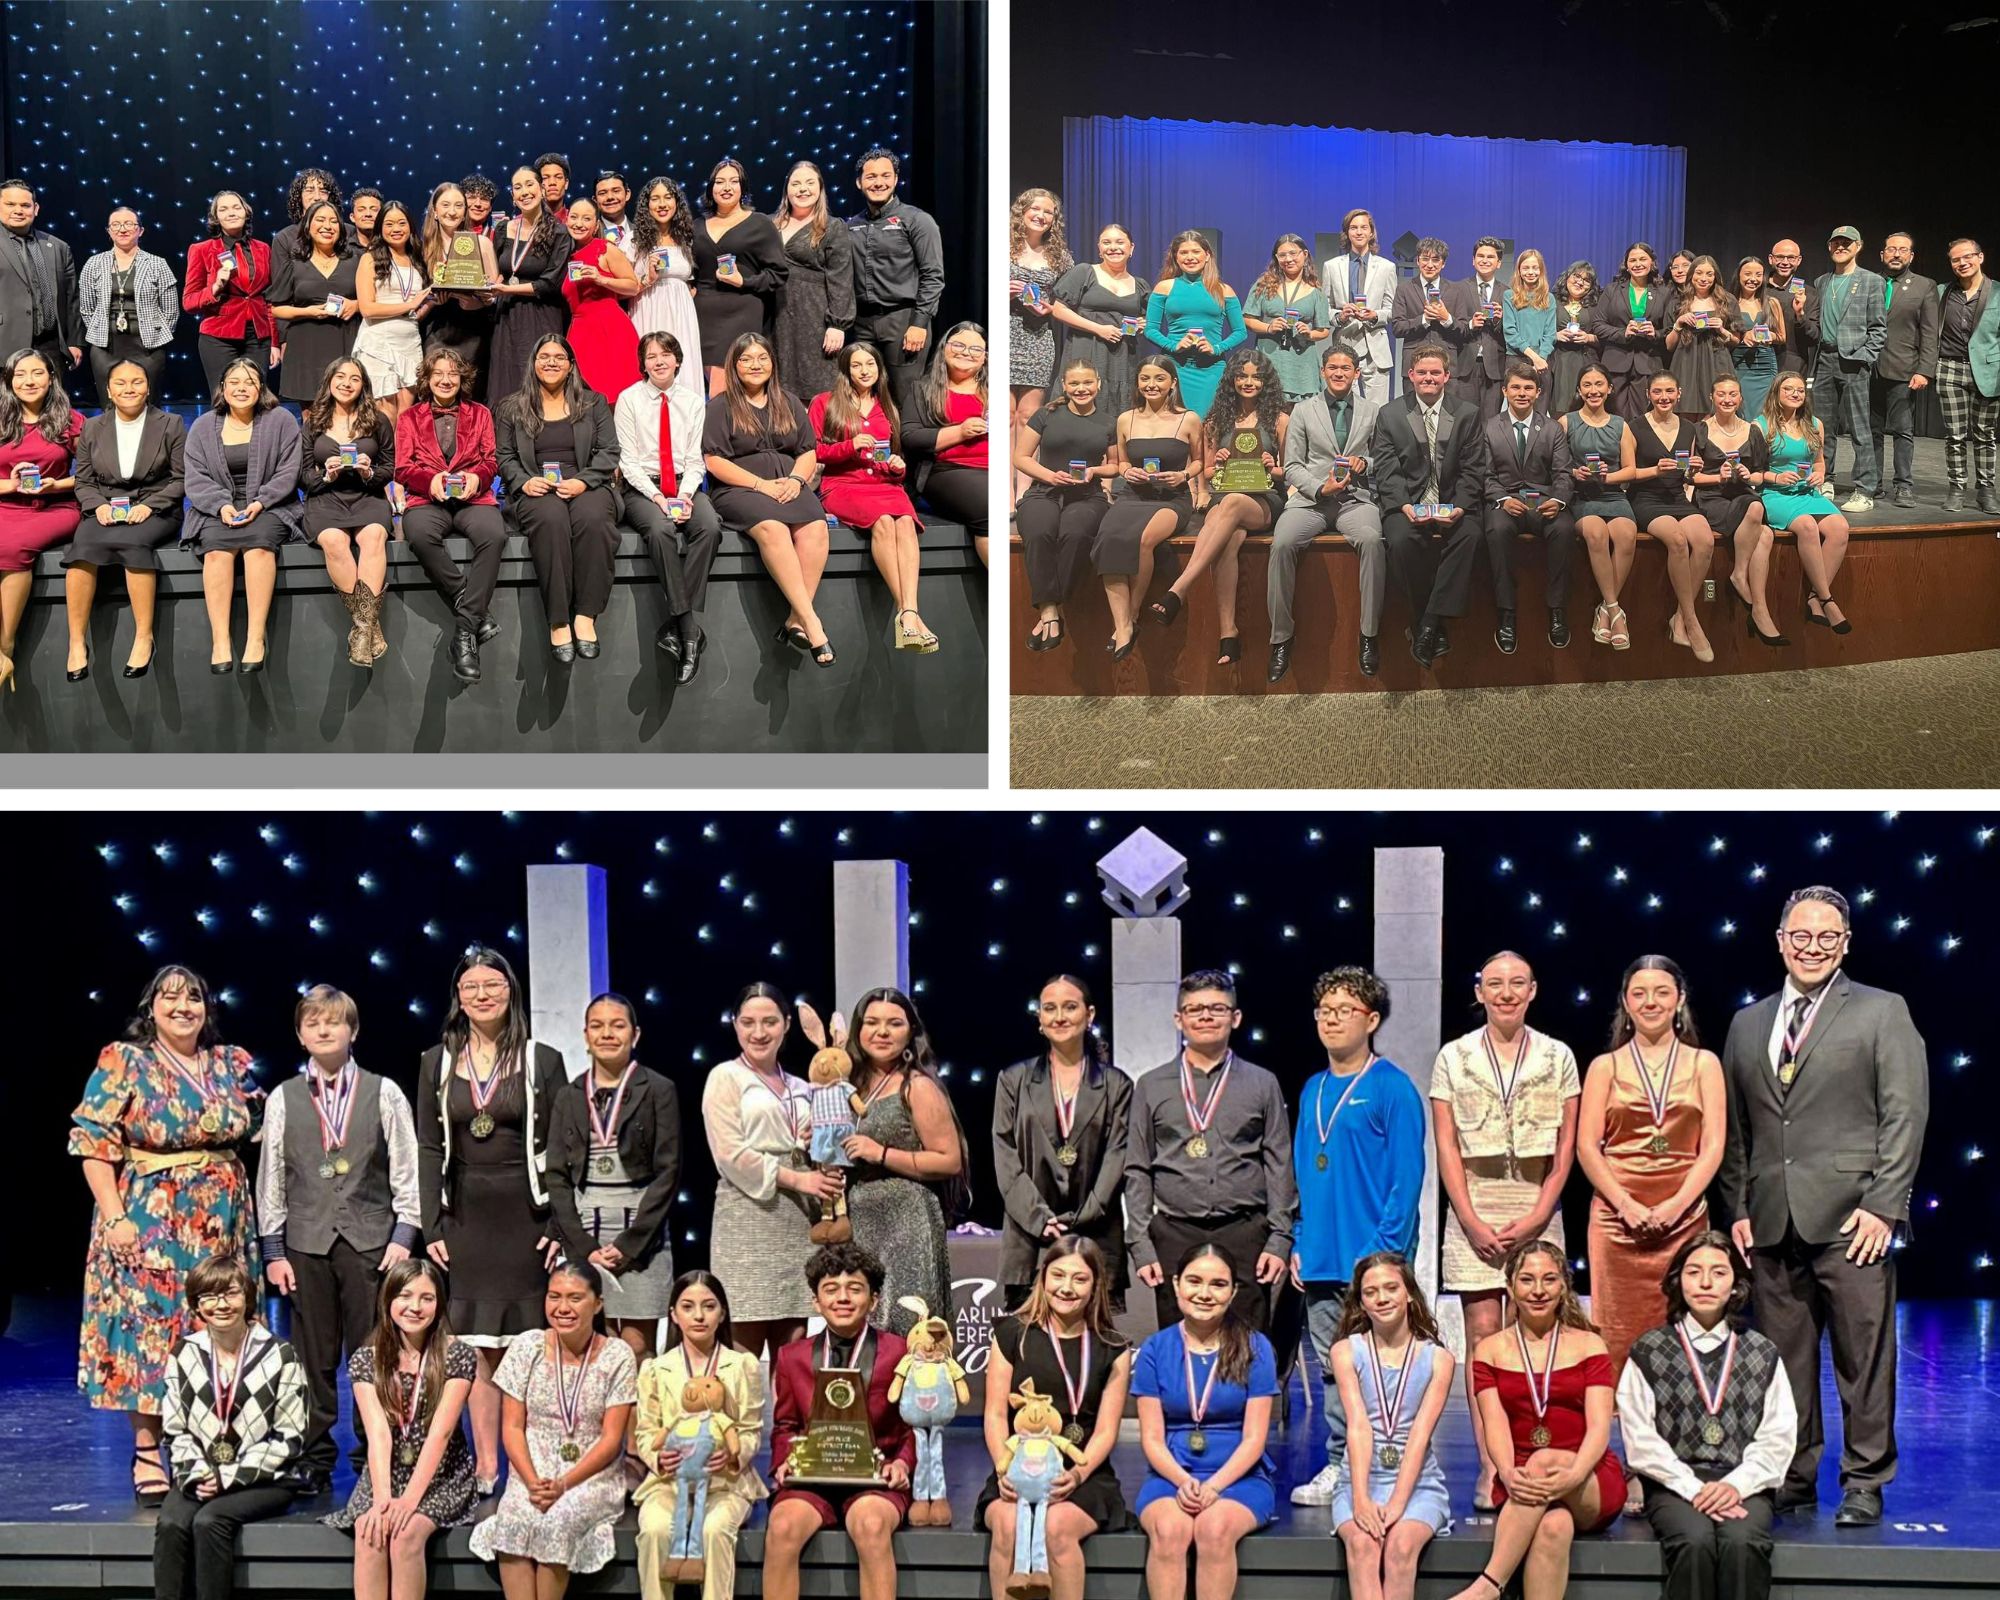 Harlingen High School, Harlingen South, and Gutierrez Middle School earn One-Act Play District Championship